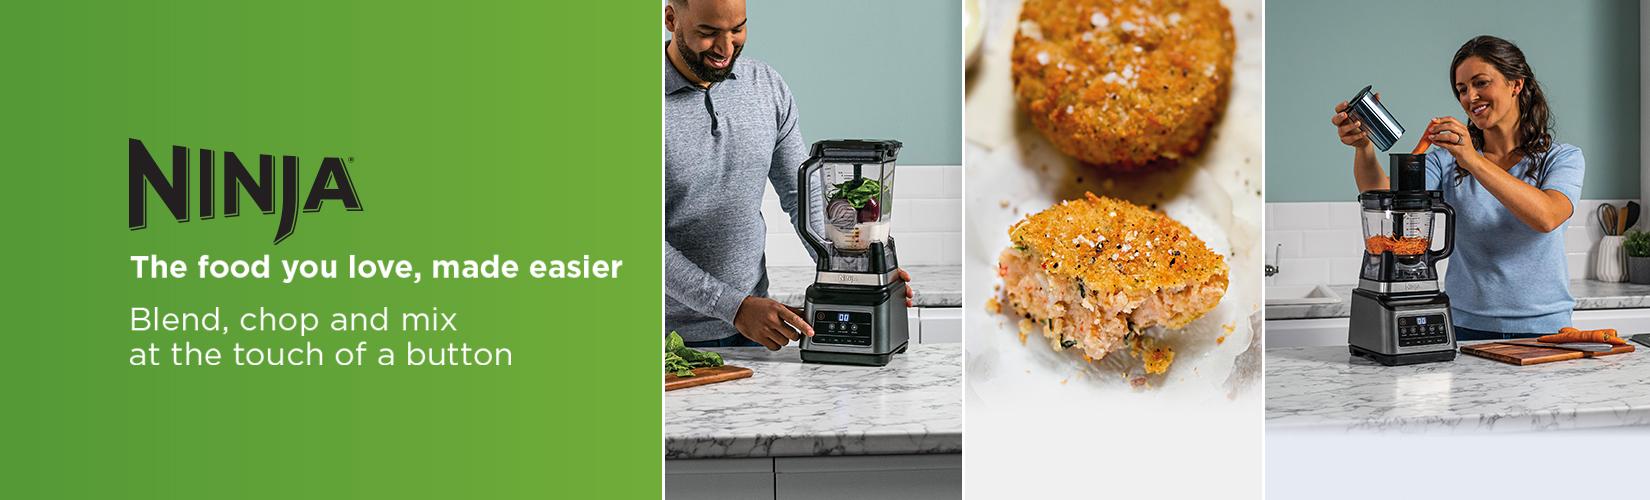 Ninja. The food you love, made easier blend, chop and mix at the touch of a button.